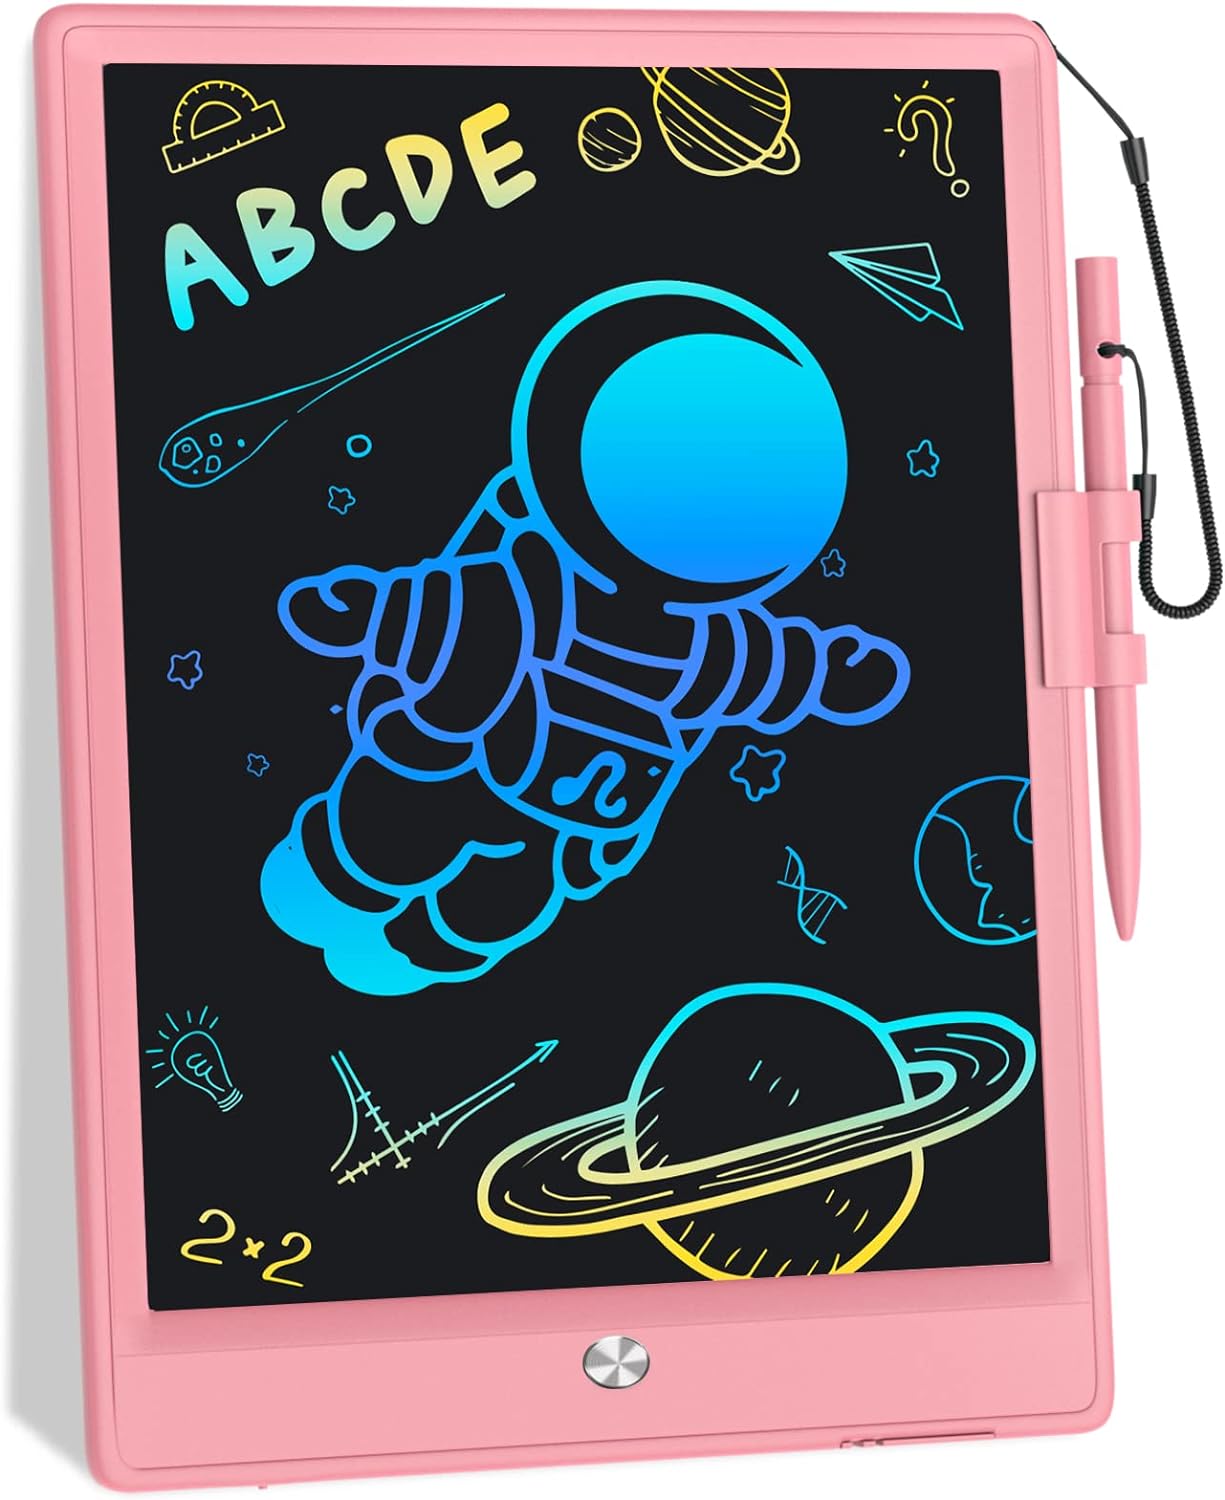 LCD Writing Tablet,10 Inch Drawing Tablet Kids Tablets Doodle Board Electronic Drawing Board for Adults and Kids Ages 3+ (Pink)